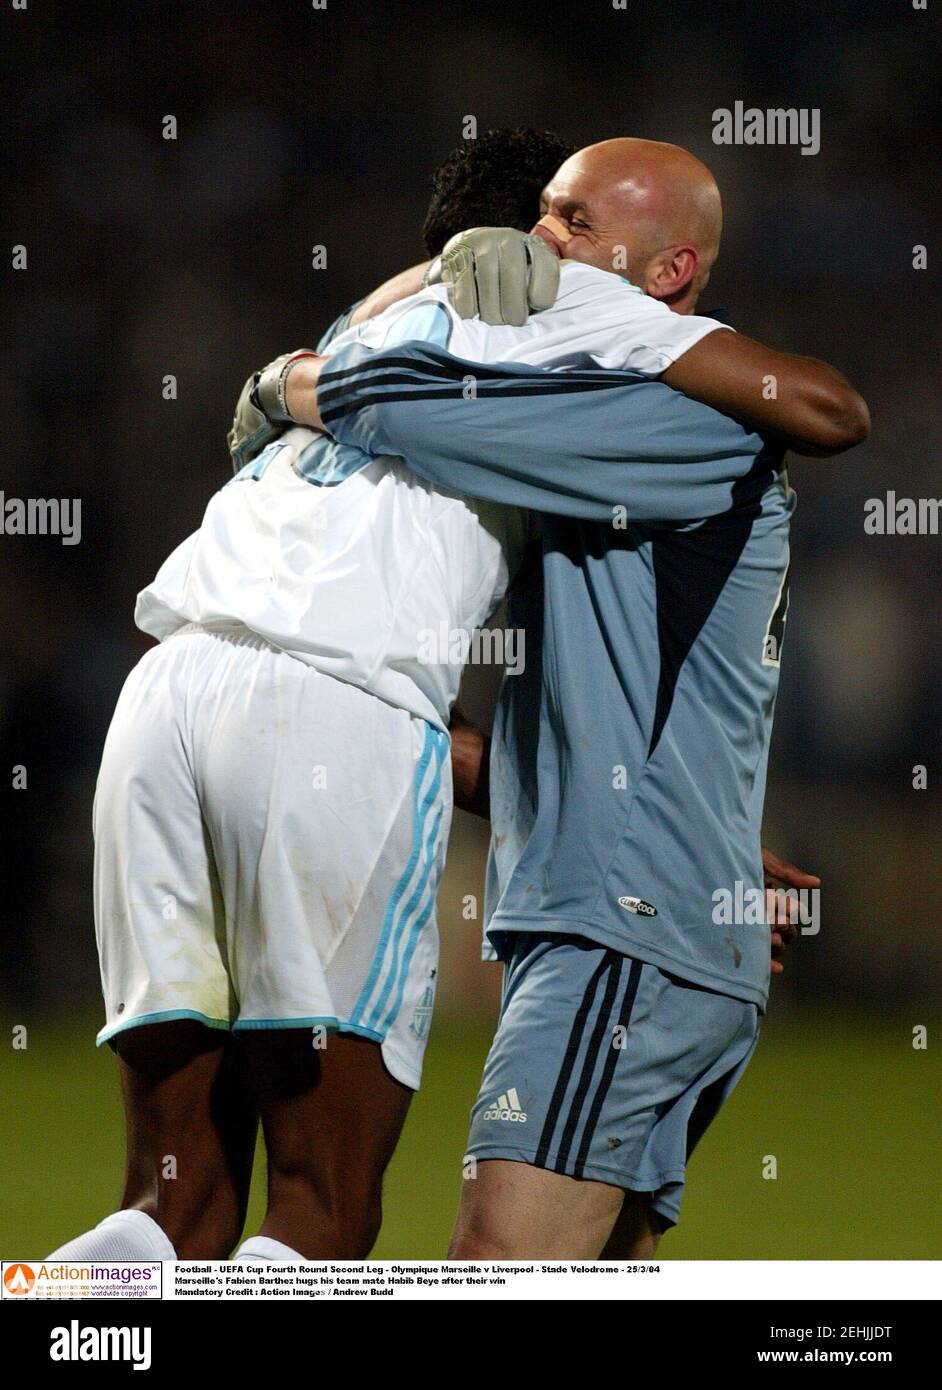 Football - UEFA Cup Fourth Round Second Leg - Olympique Marseille v Liverpool - Stade Velodrome - 25/3/04  Marseille's Fabien Barthez hugs his team mate Habib Beye after their win  Mandatory Credit : Action Images / Andrew Budd Stock Photo